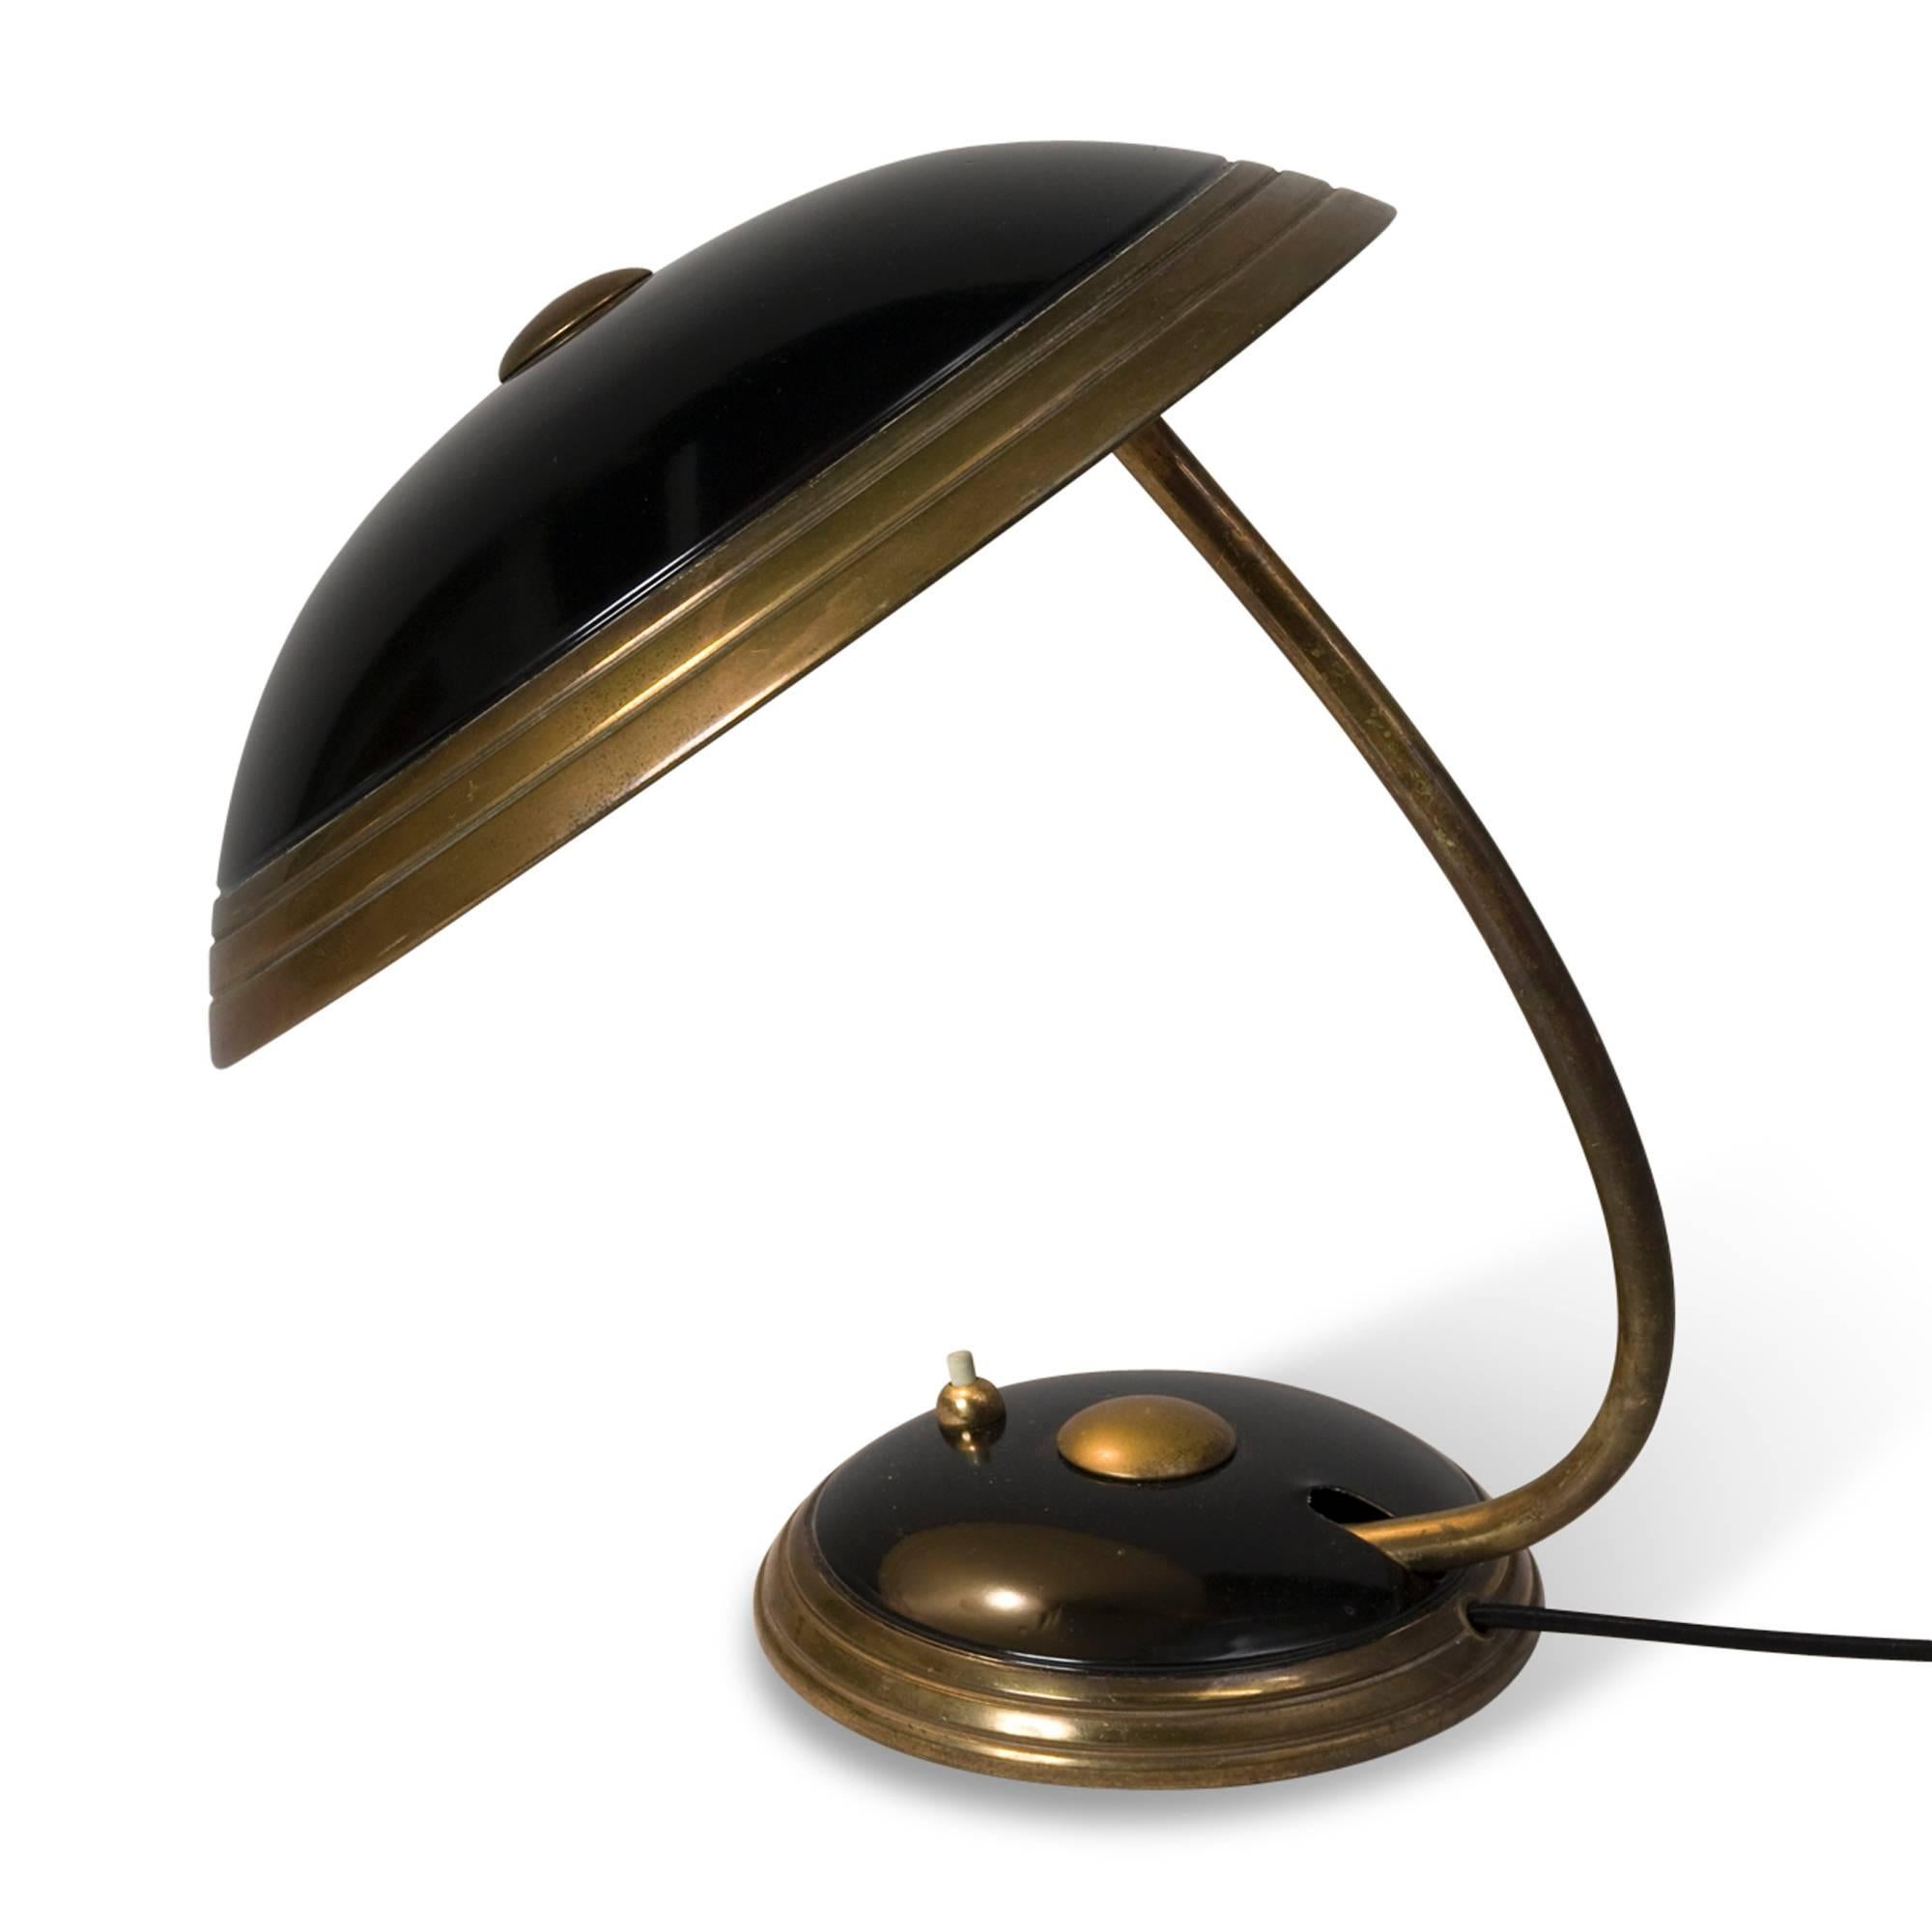 Mid-Century Modern Dome Shade Desk Lamp by Helo, German, 1950s